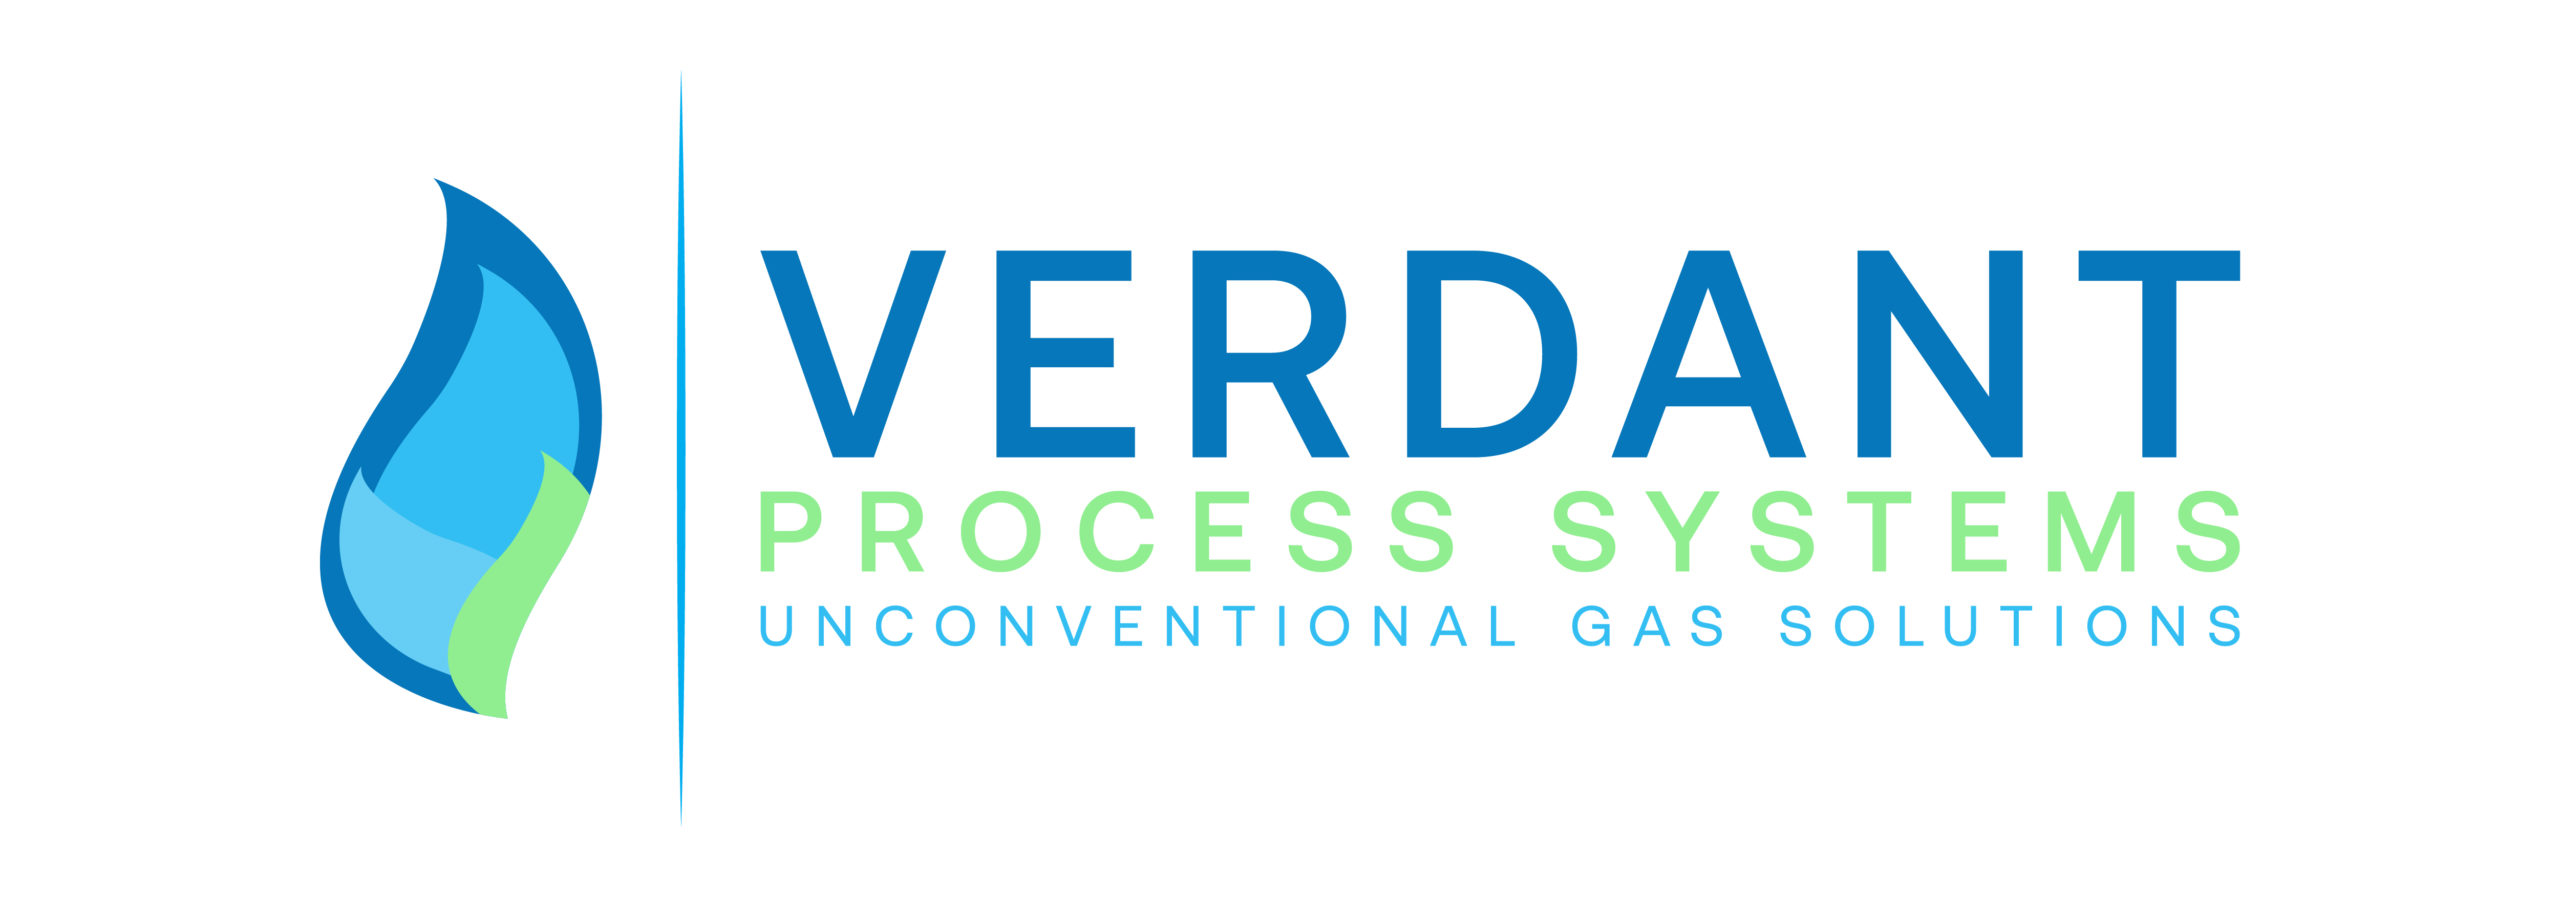 Unconventional Gas Solutions